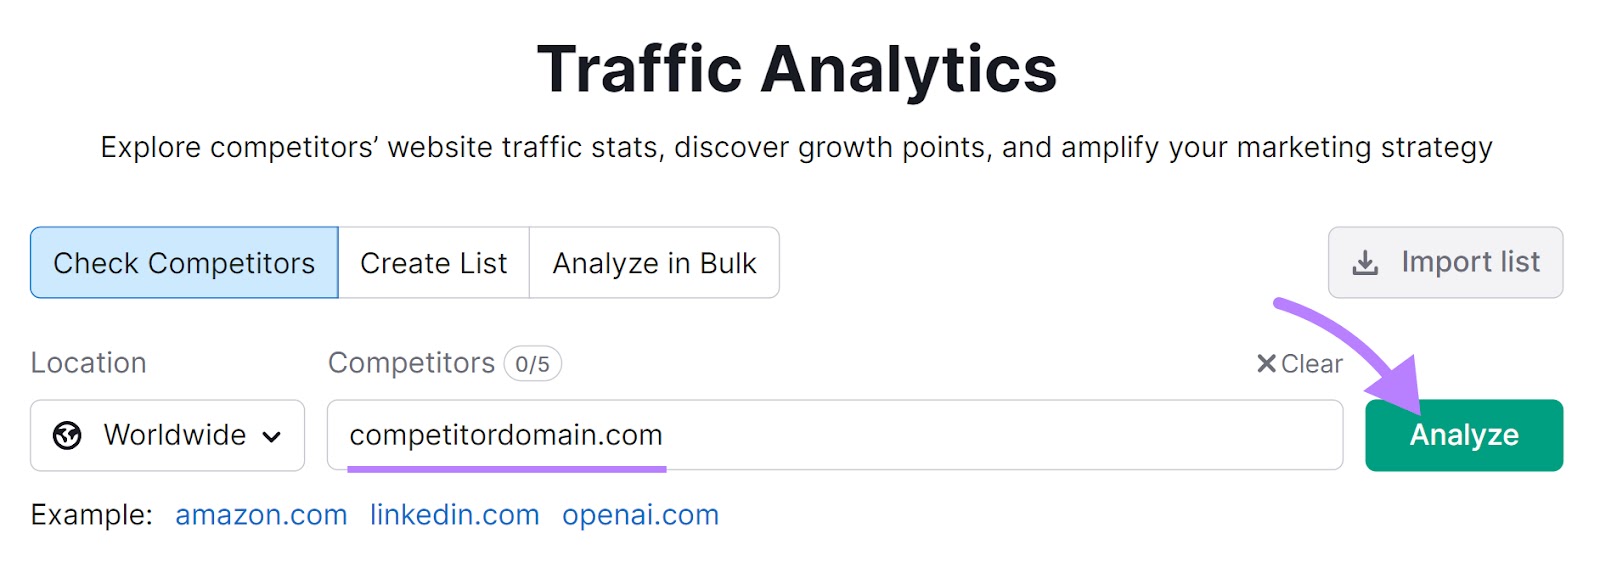 An example competitor's domain entered into Traffic Analytics search bar